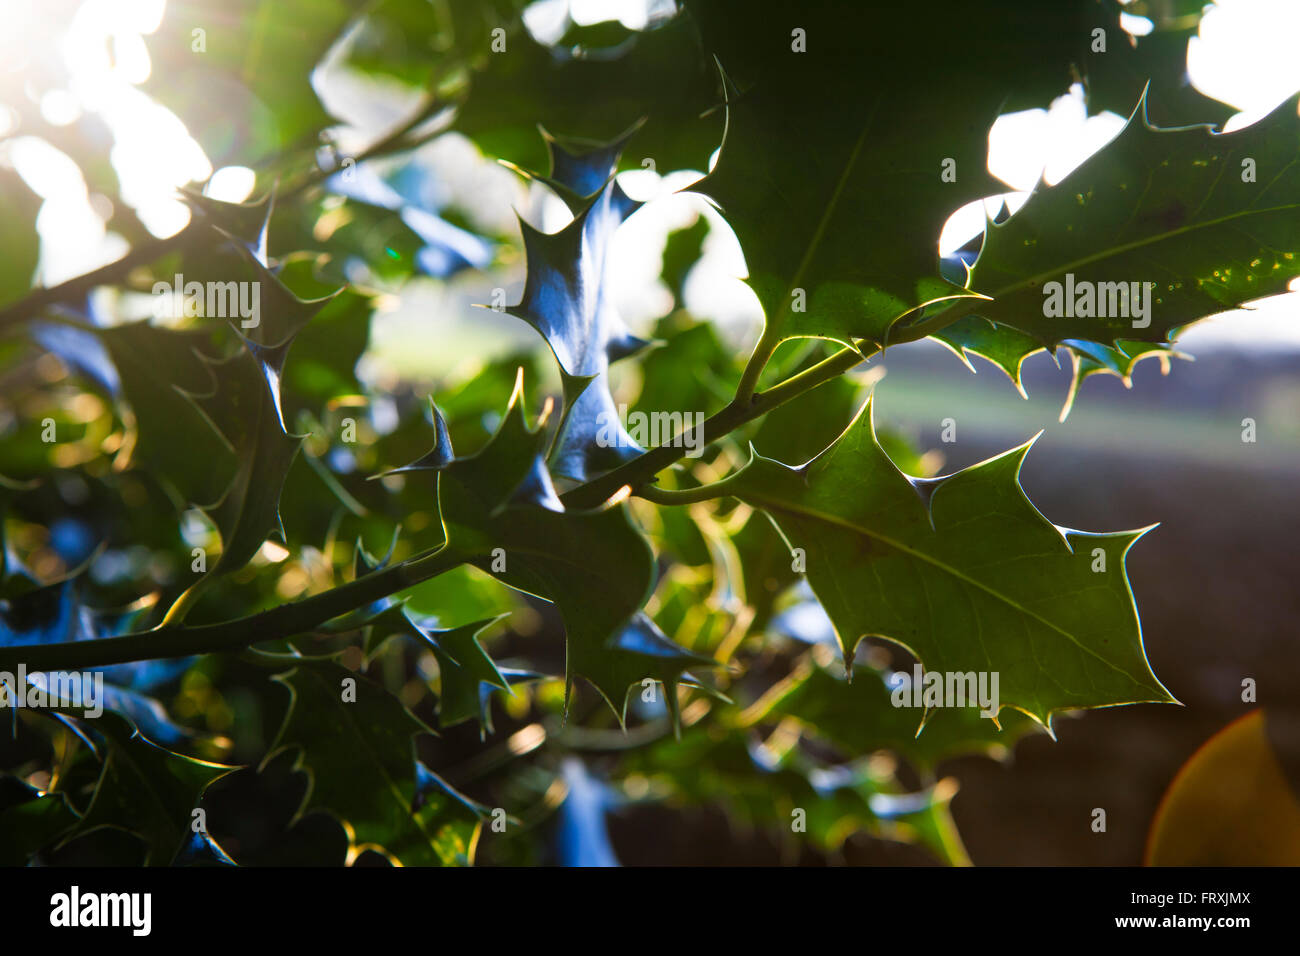 Holly leaves lit by the setting sun show their yellow edges and spikes. Stock Photo